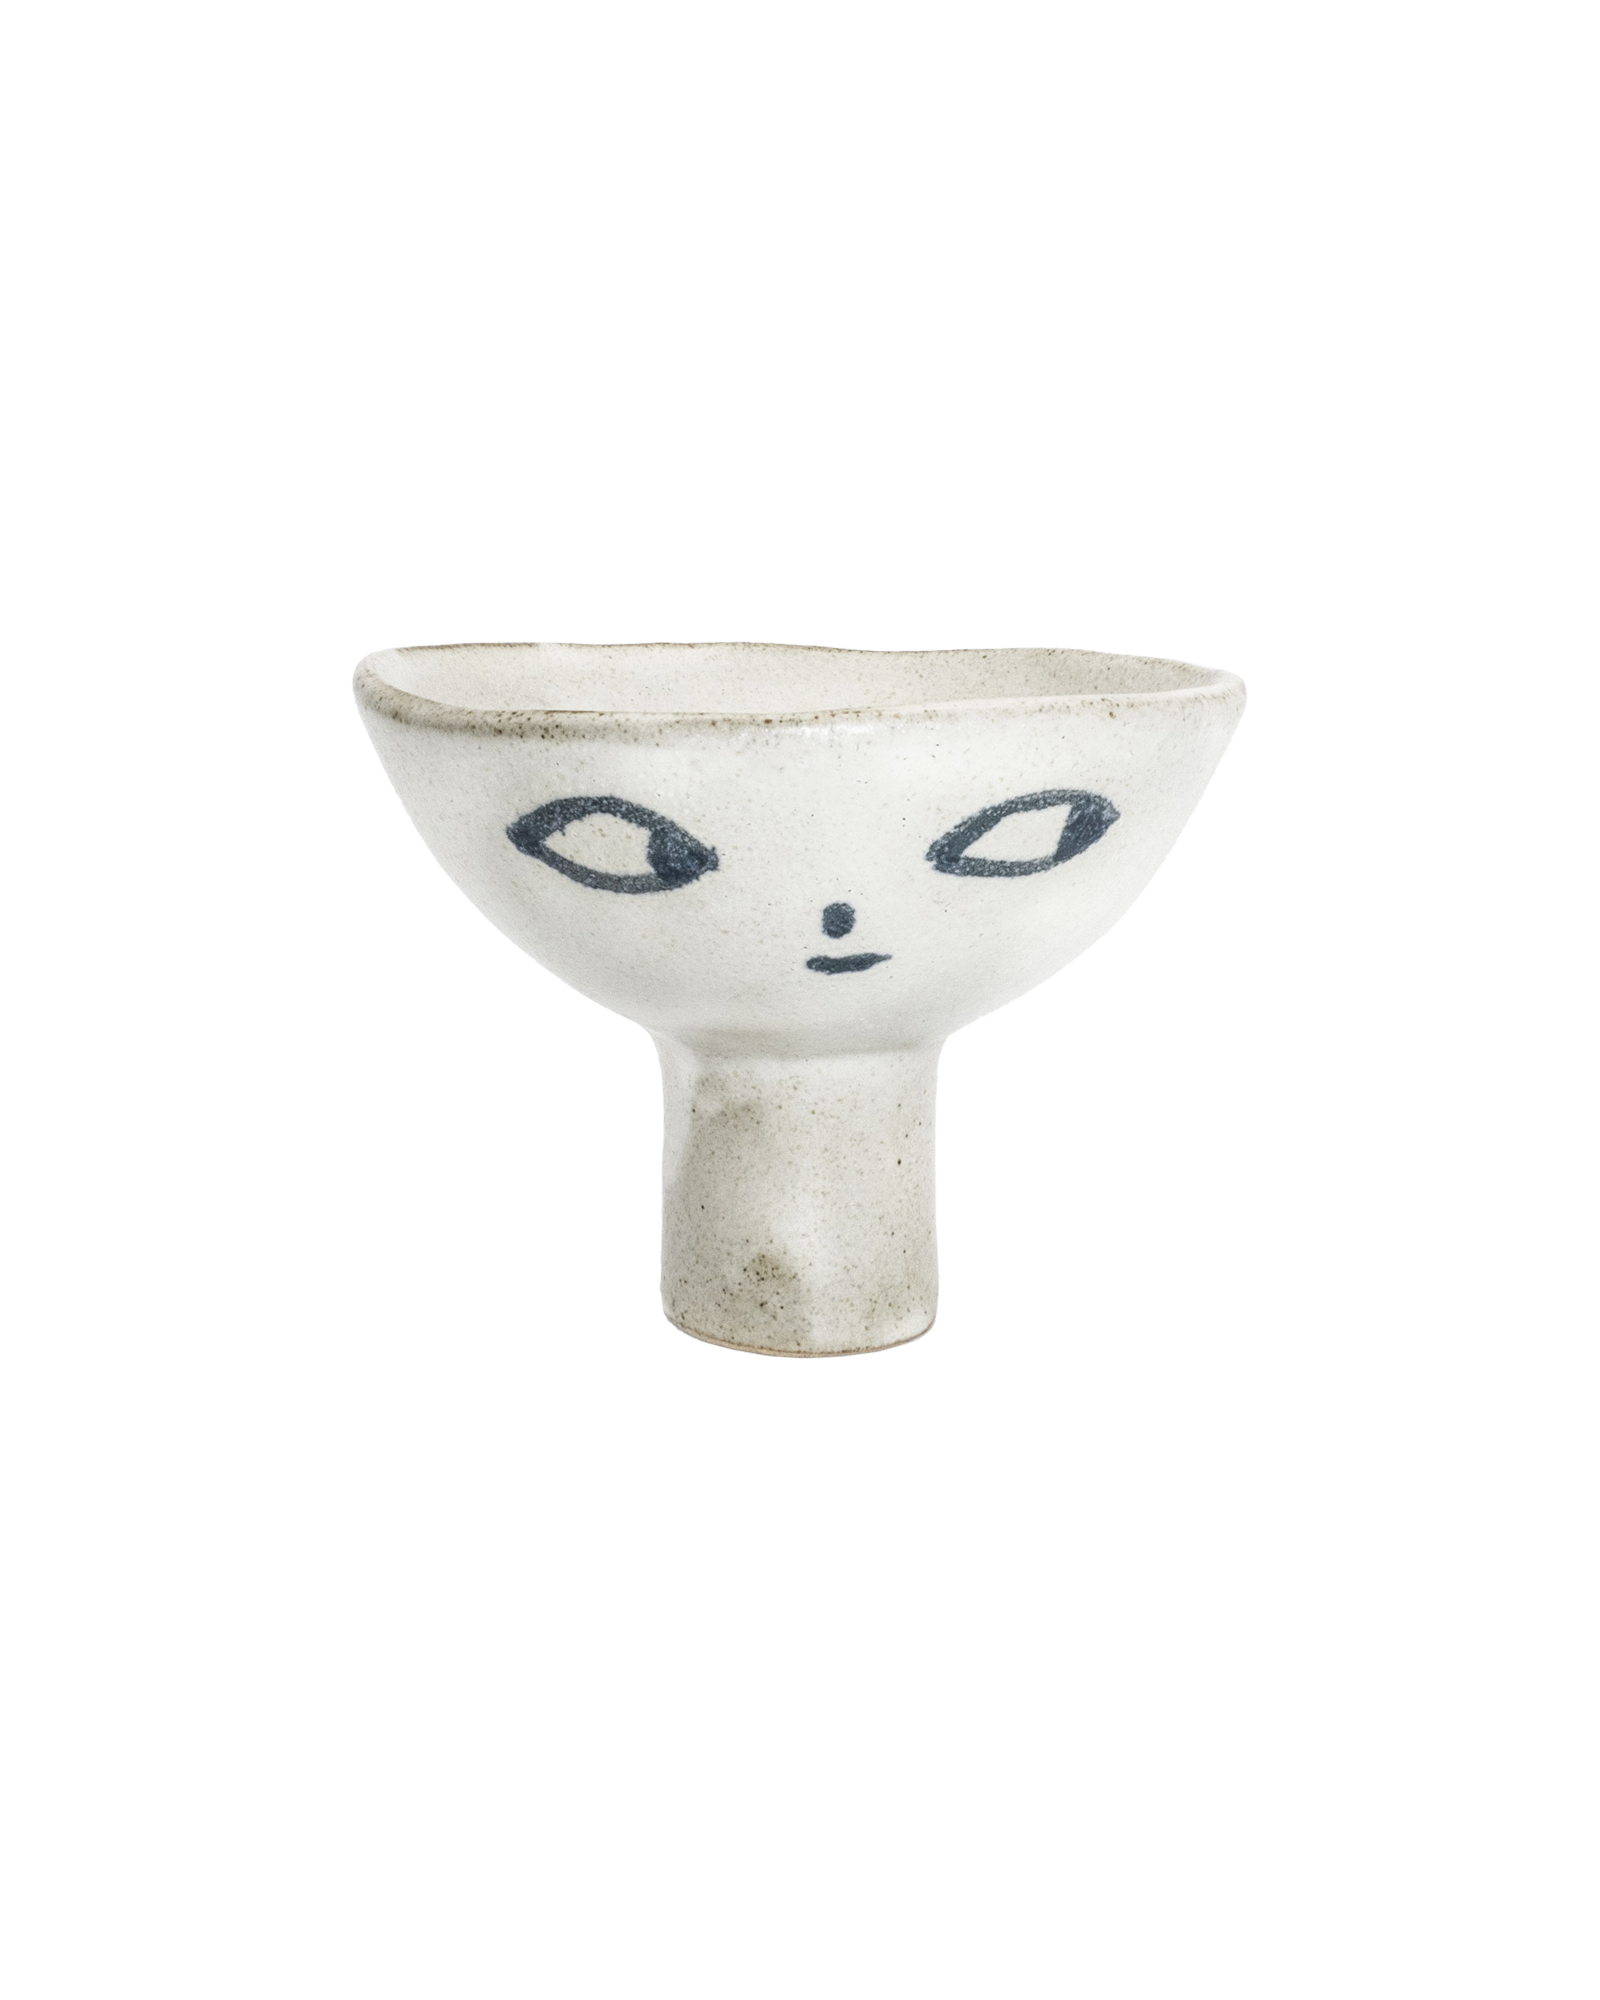 Long Necked Bowl